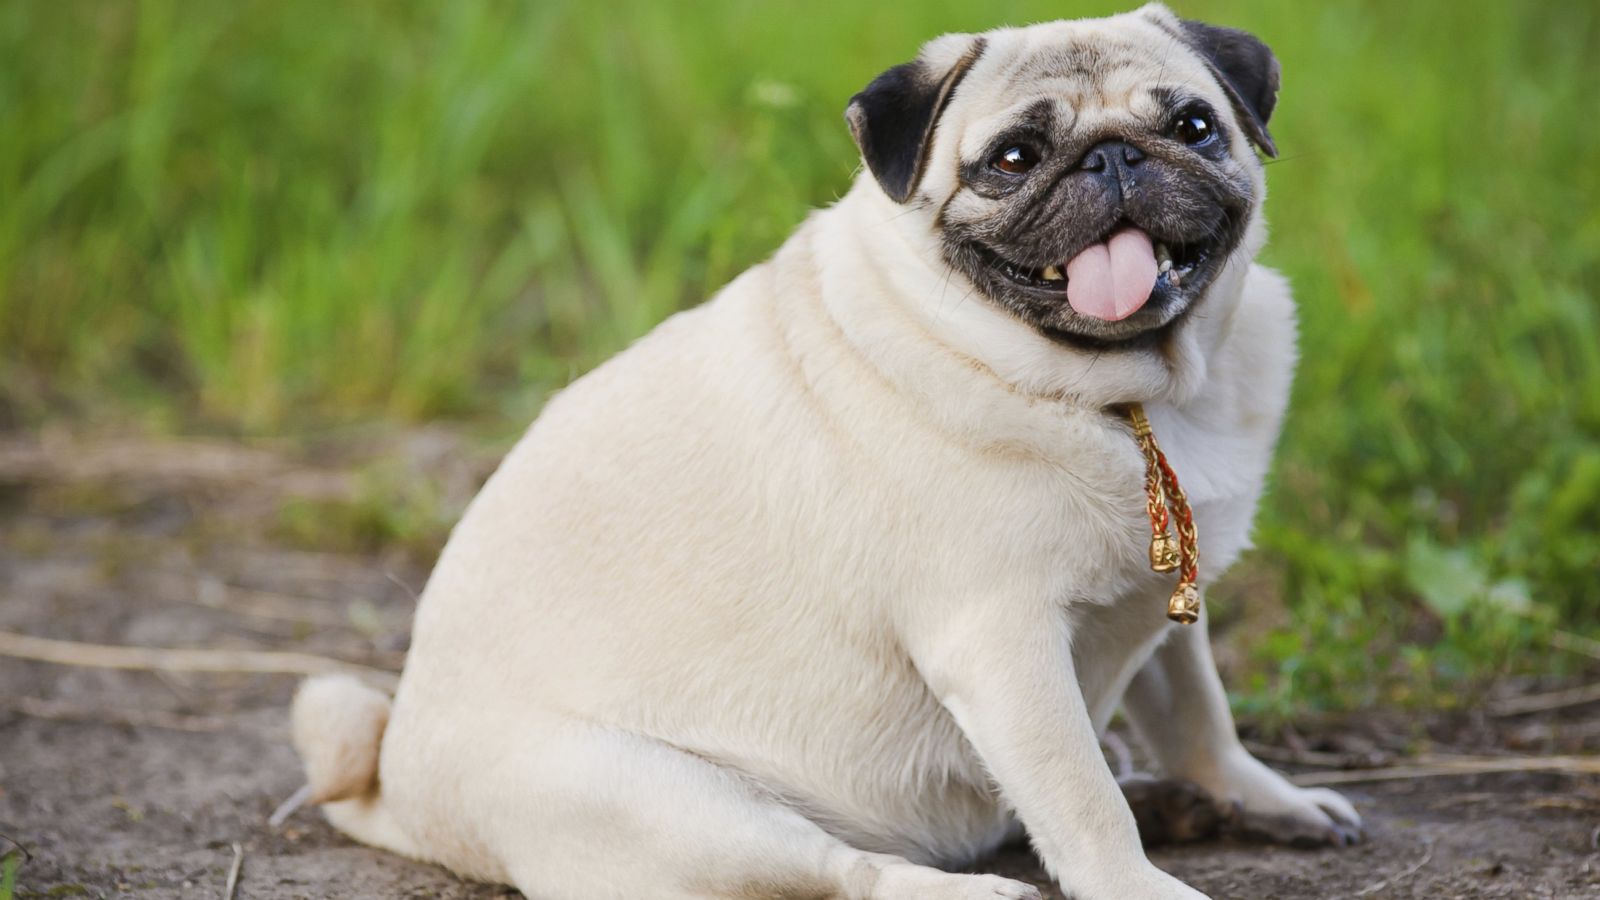 Is Your Dog Too Fat? How to Get a 